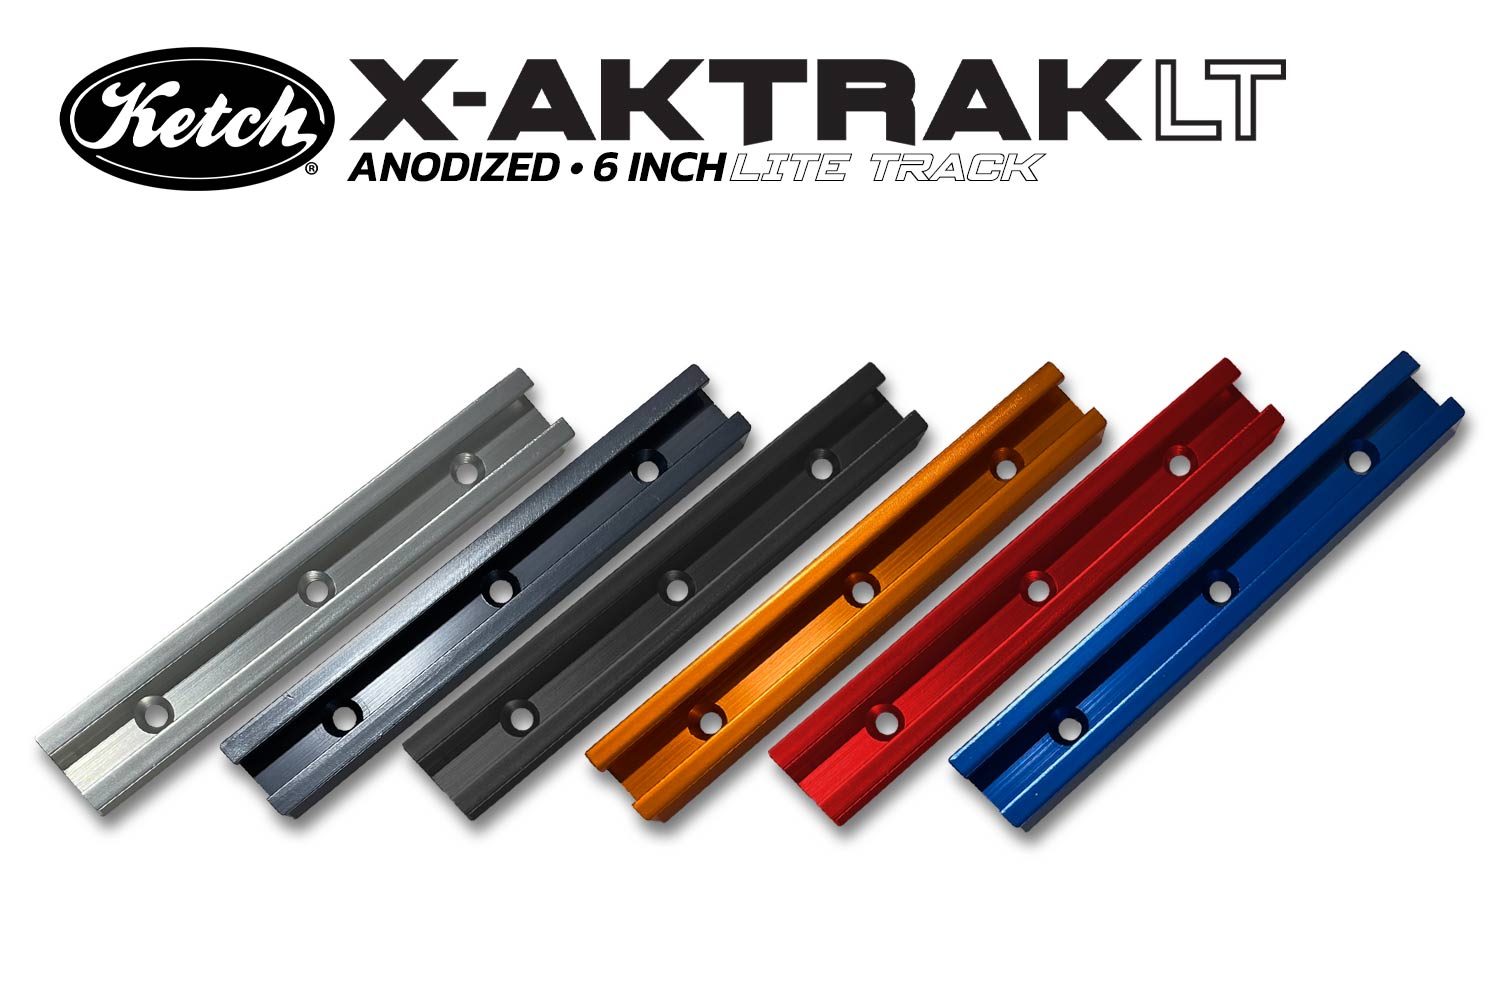 Aluminum anodized 6 inch X-Aktrak lite t-track accessory mounting solution for kayaks and other uses available in six colors.